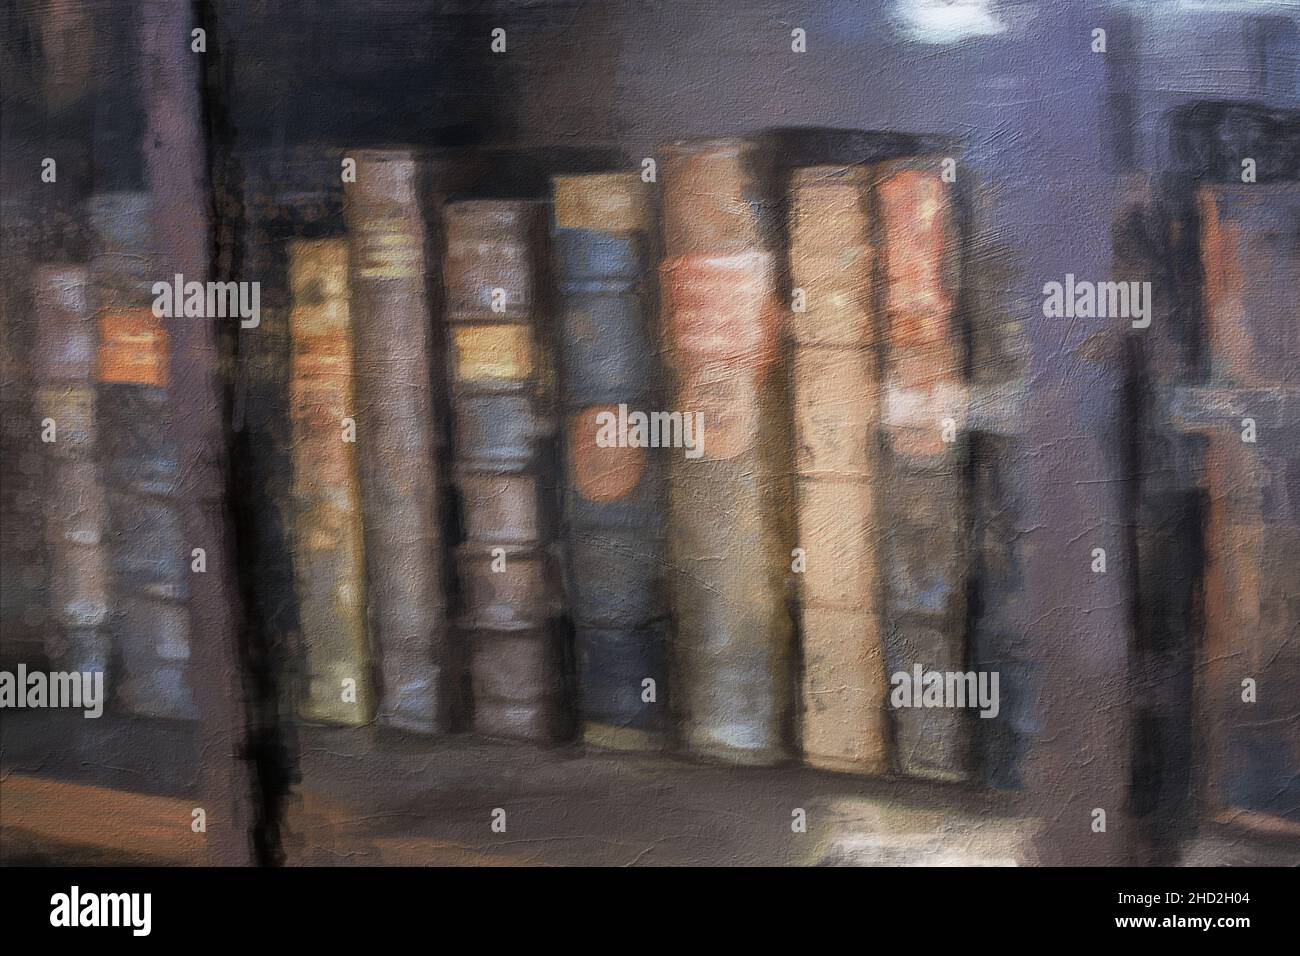 Oil painting shelf with old books Stock Photo